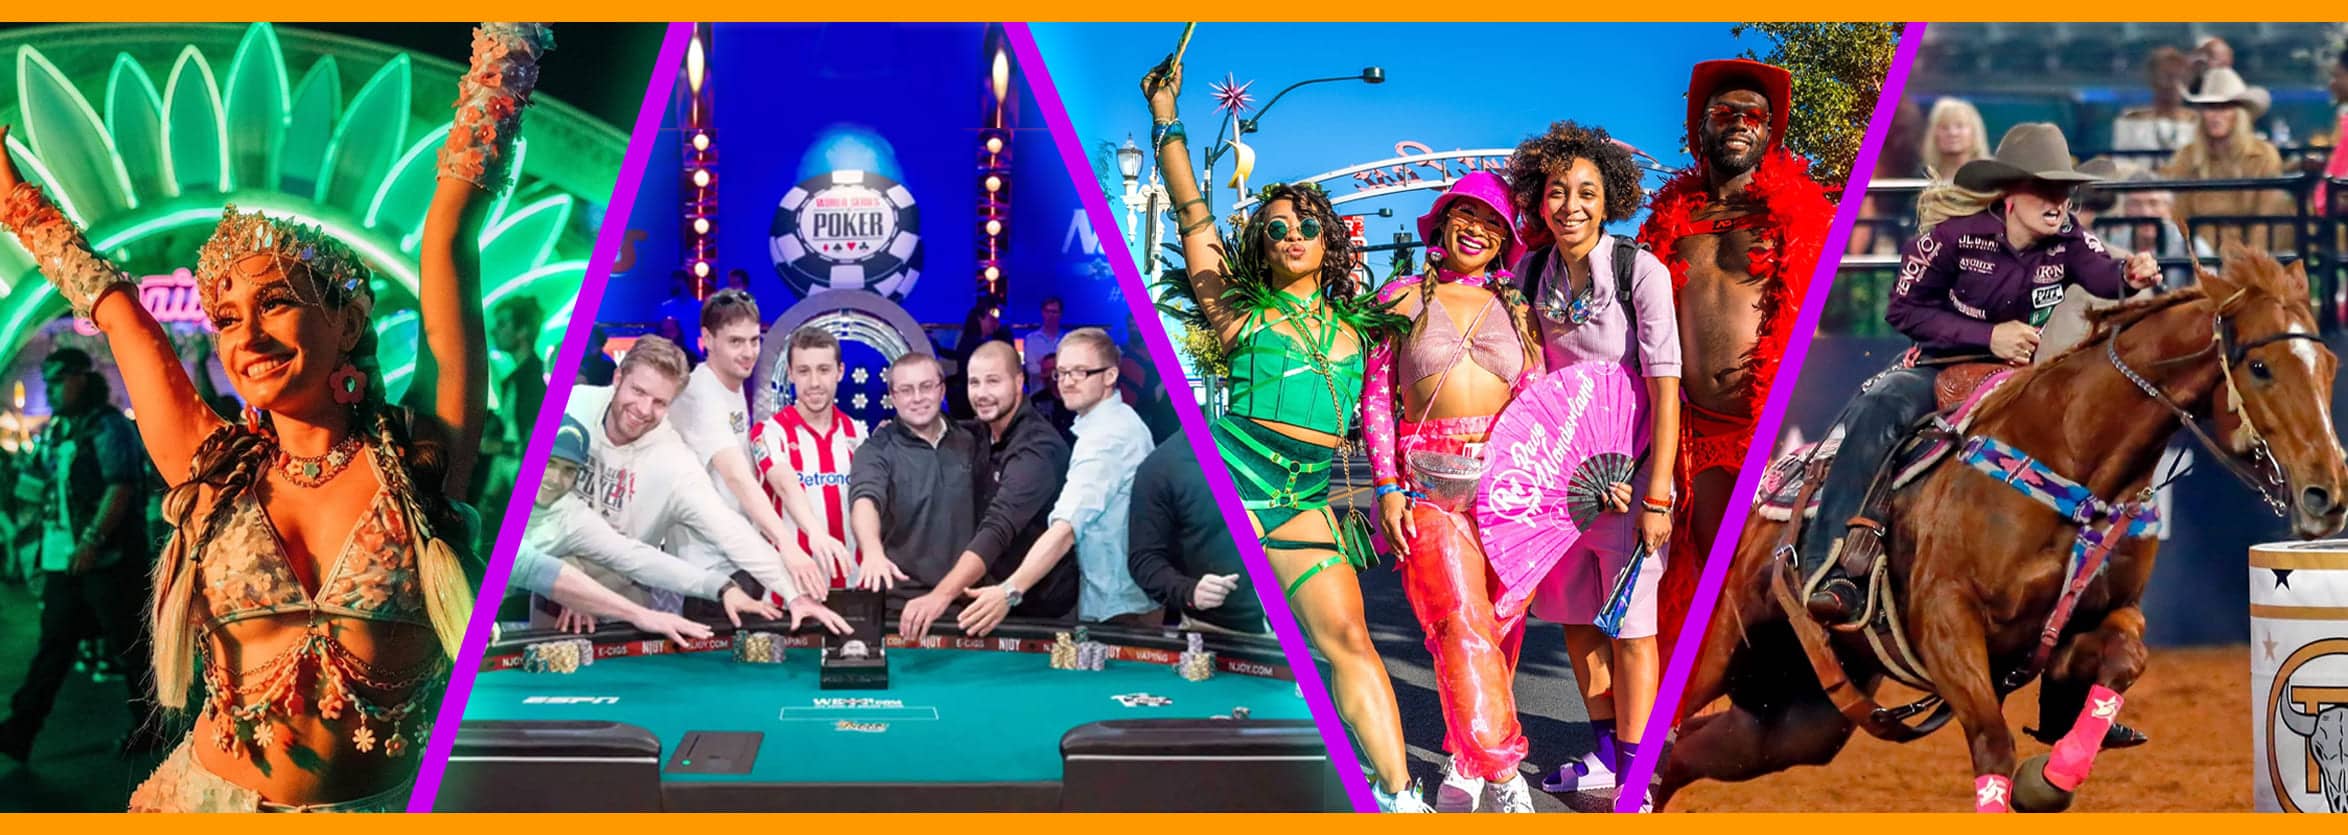 A collage showcasing vibrant Las Vegas seasonal events: a costumed dancer at a festival, a group around a poker table, revelers in festive gear, and a rodeo competitor in action.